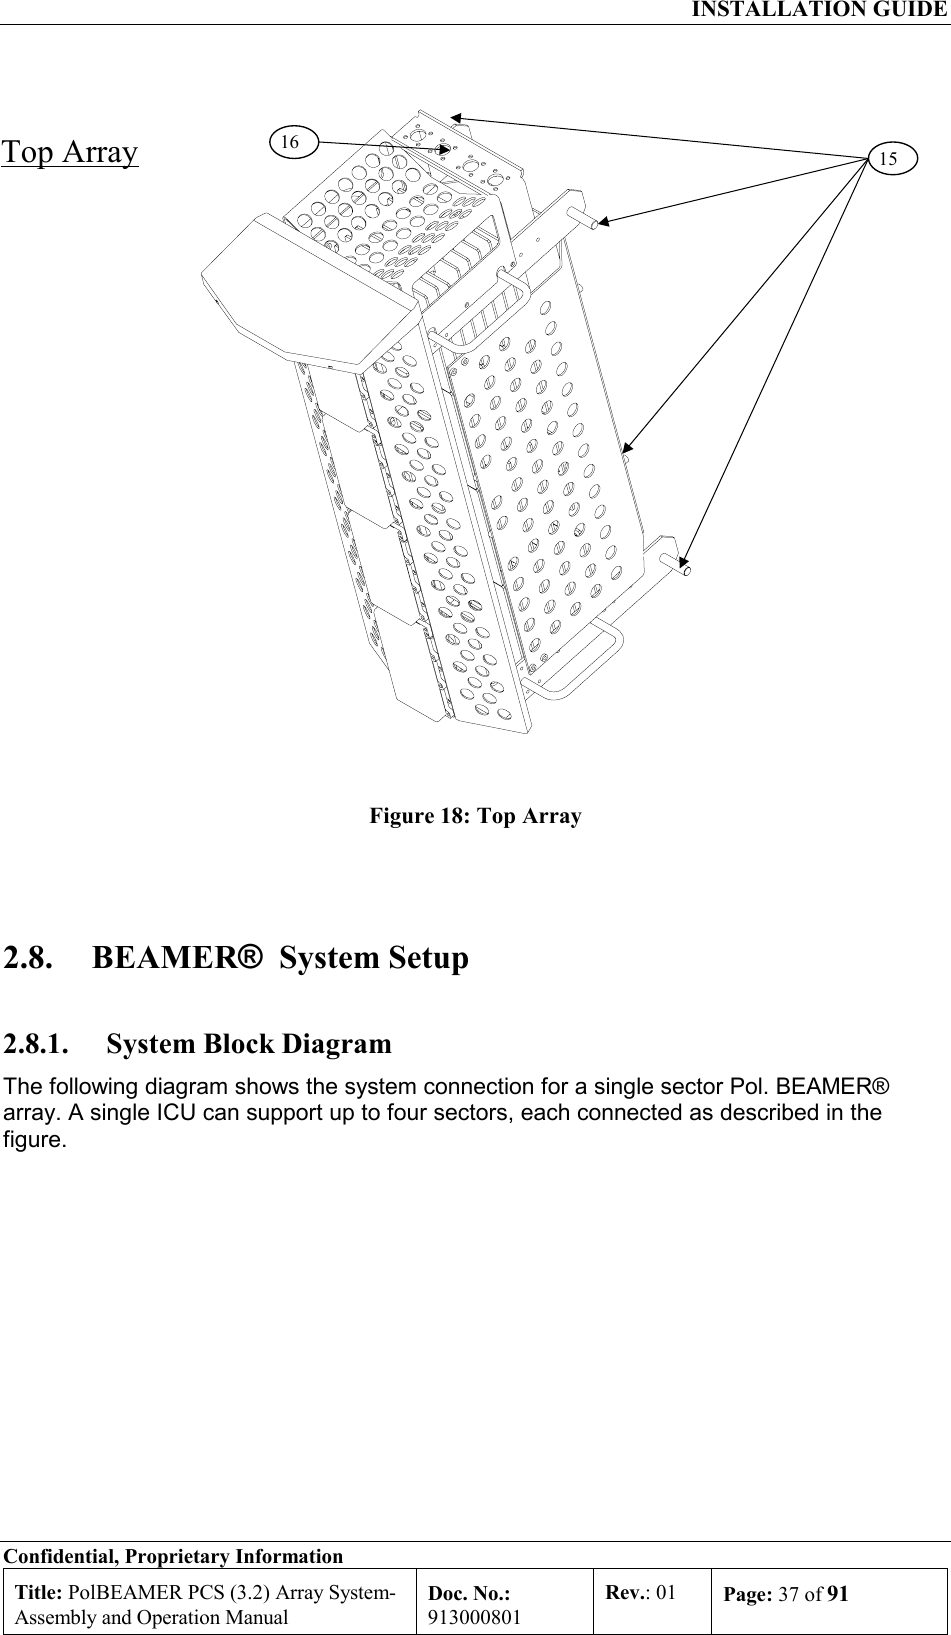  INSTALLATION GUIDE Confidential, Proprietary Information Title: PolBEAMER PCS (3.2) Array System- Assembly and Operation Manual Doc. No.: 913000801 Rev.: 01  Page: 37 of 91   Figure 18: Top Array  2.8. BEAMER®  System Setup 2.8.1.  System Block Diagram The following diagram shows the system connection for a single sector Pol. BEAMER®  array. A single ICU can support up to four sectors, each connected as described in the figure. Top Array 1516